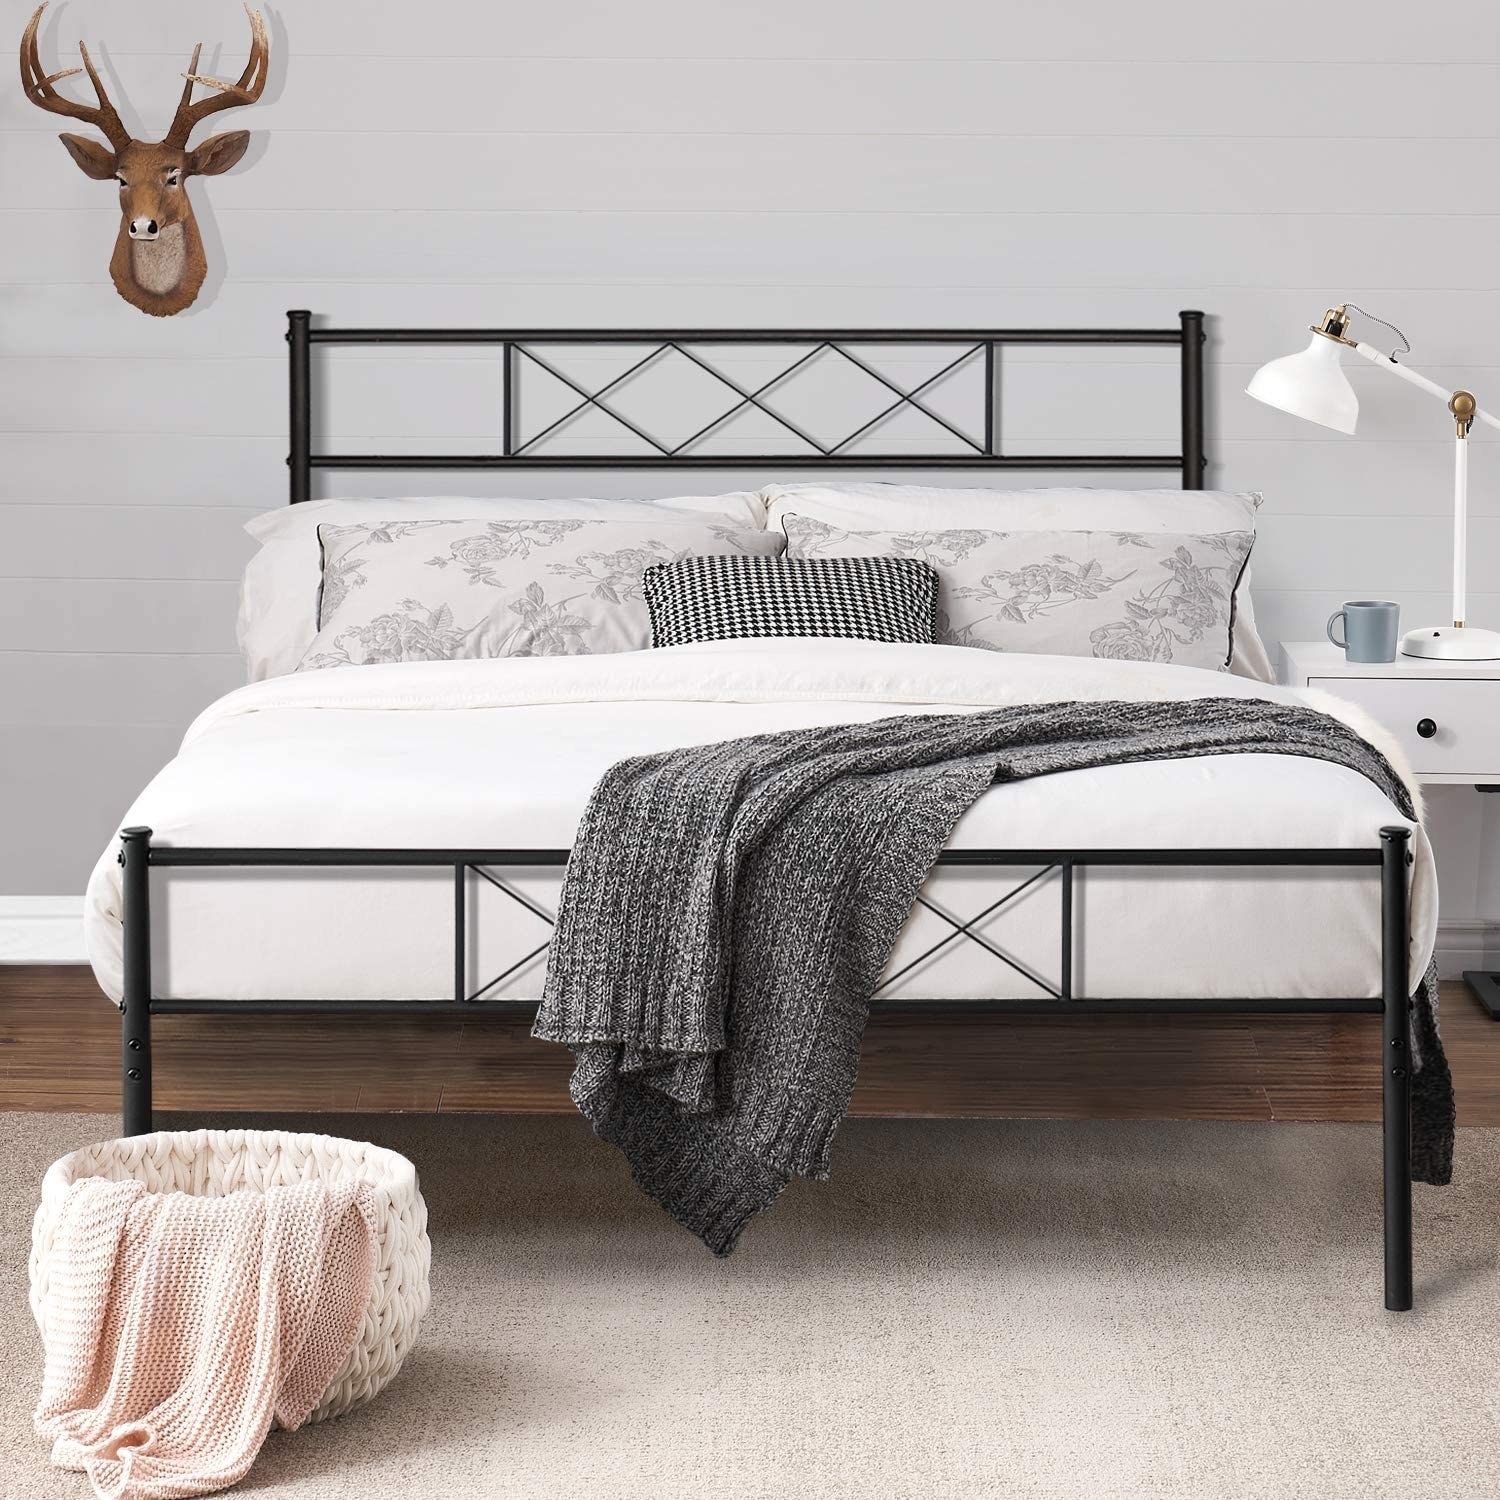 27 Bed Frames That Only Look, Average Cost Of Bed Frame